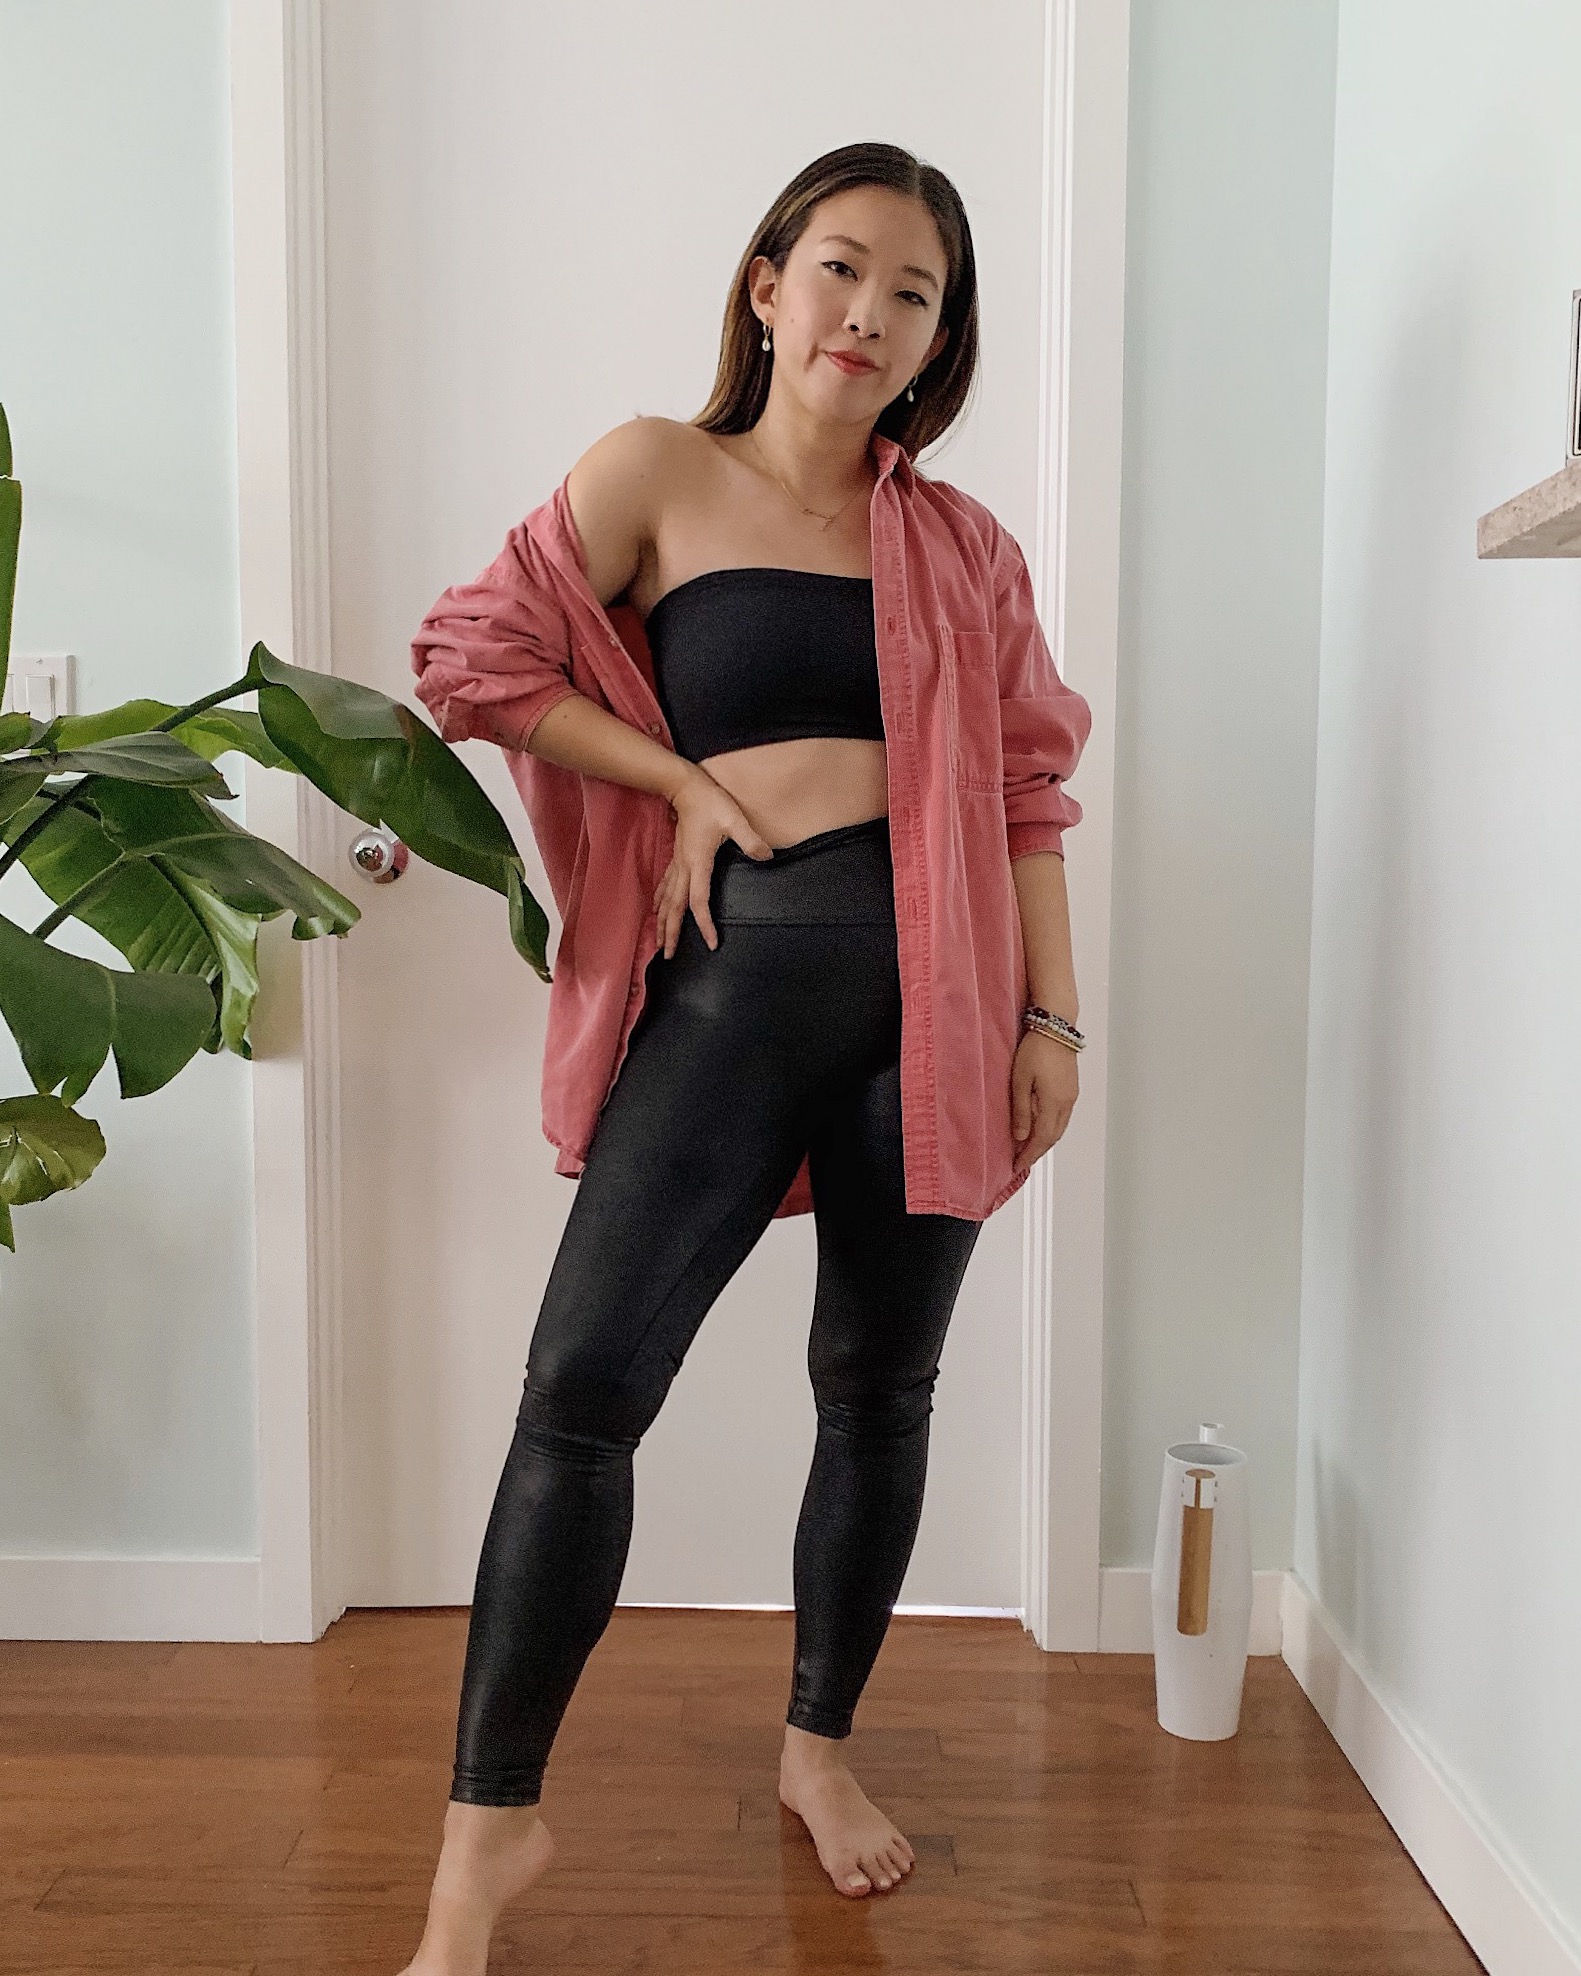 How to Style Faux Leather Leggings! - Lazzzy Sundaze